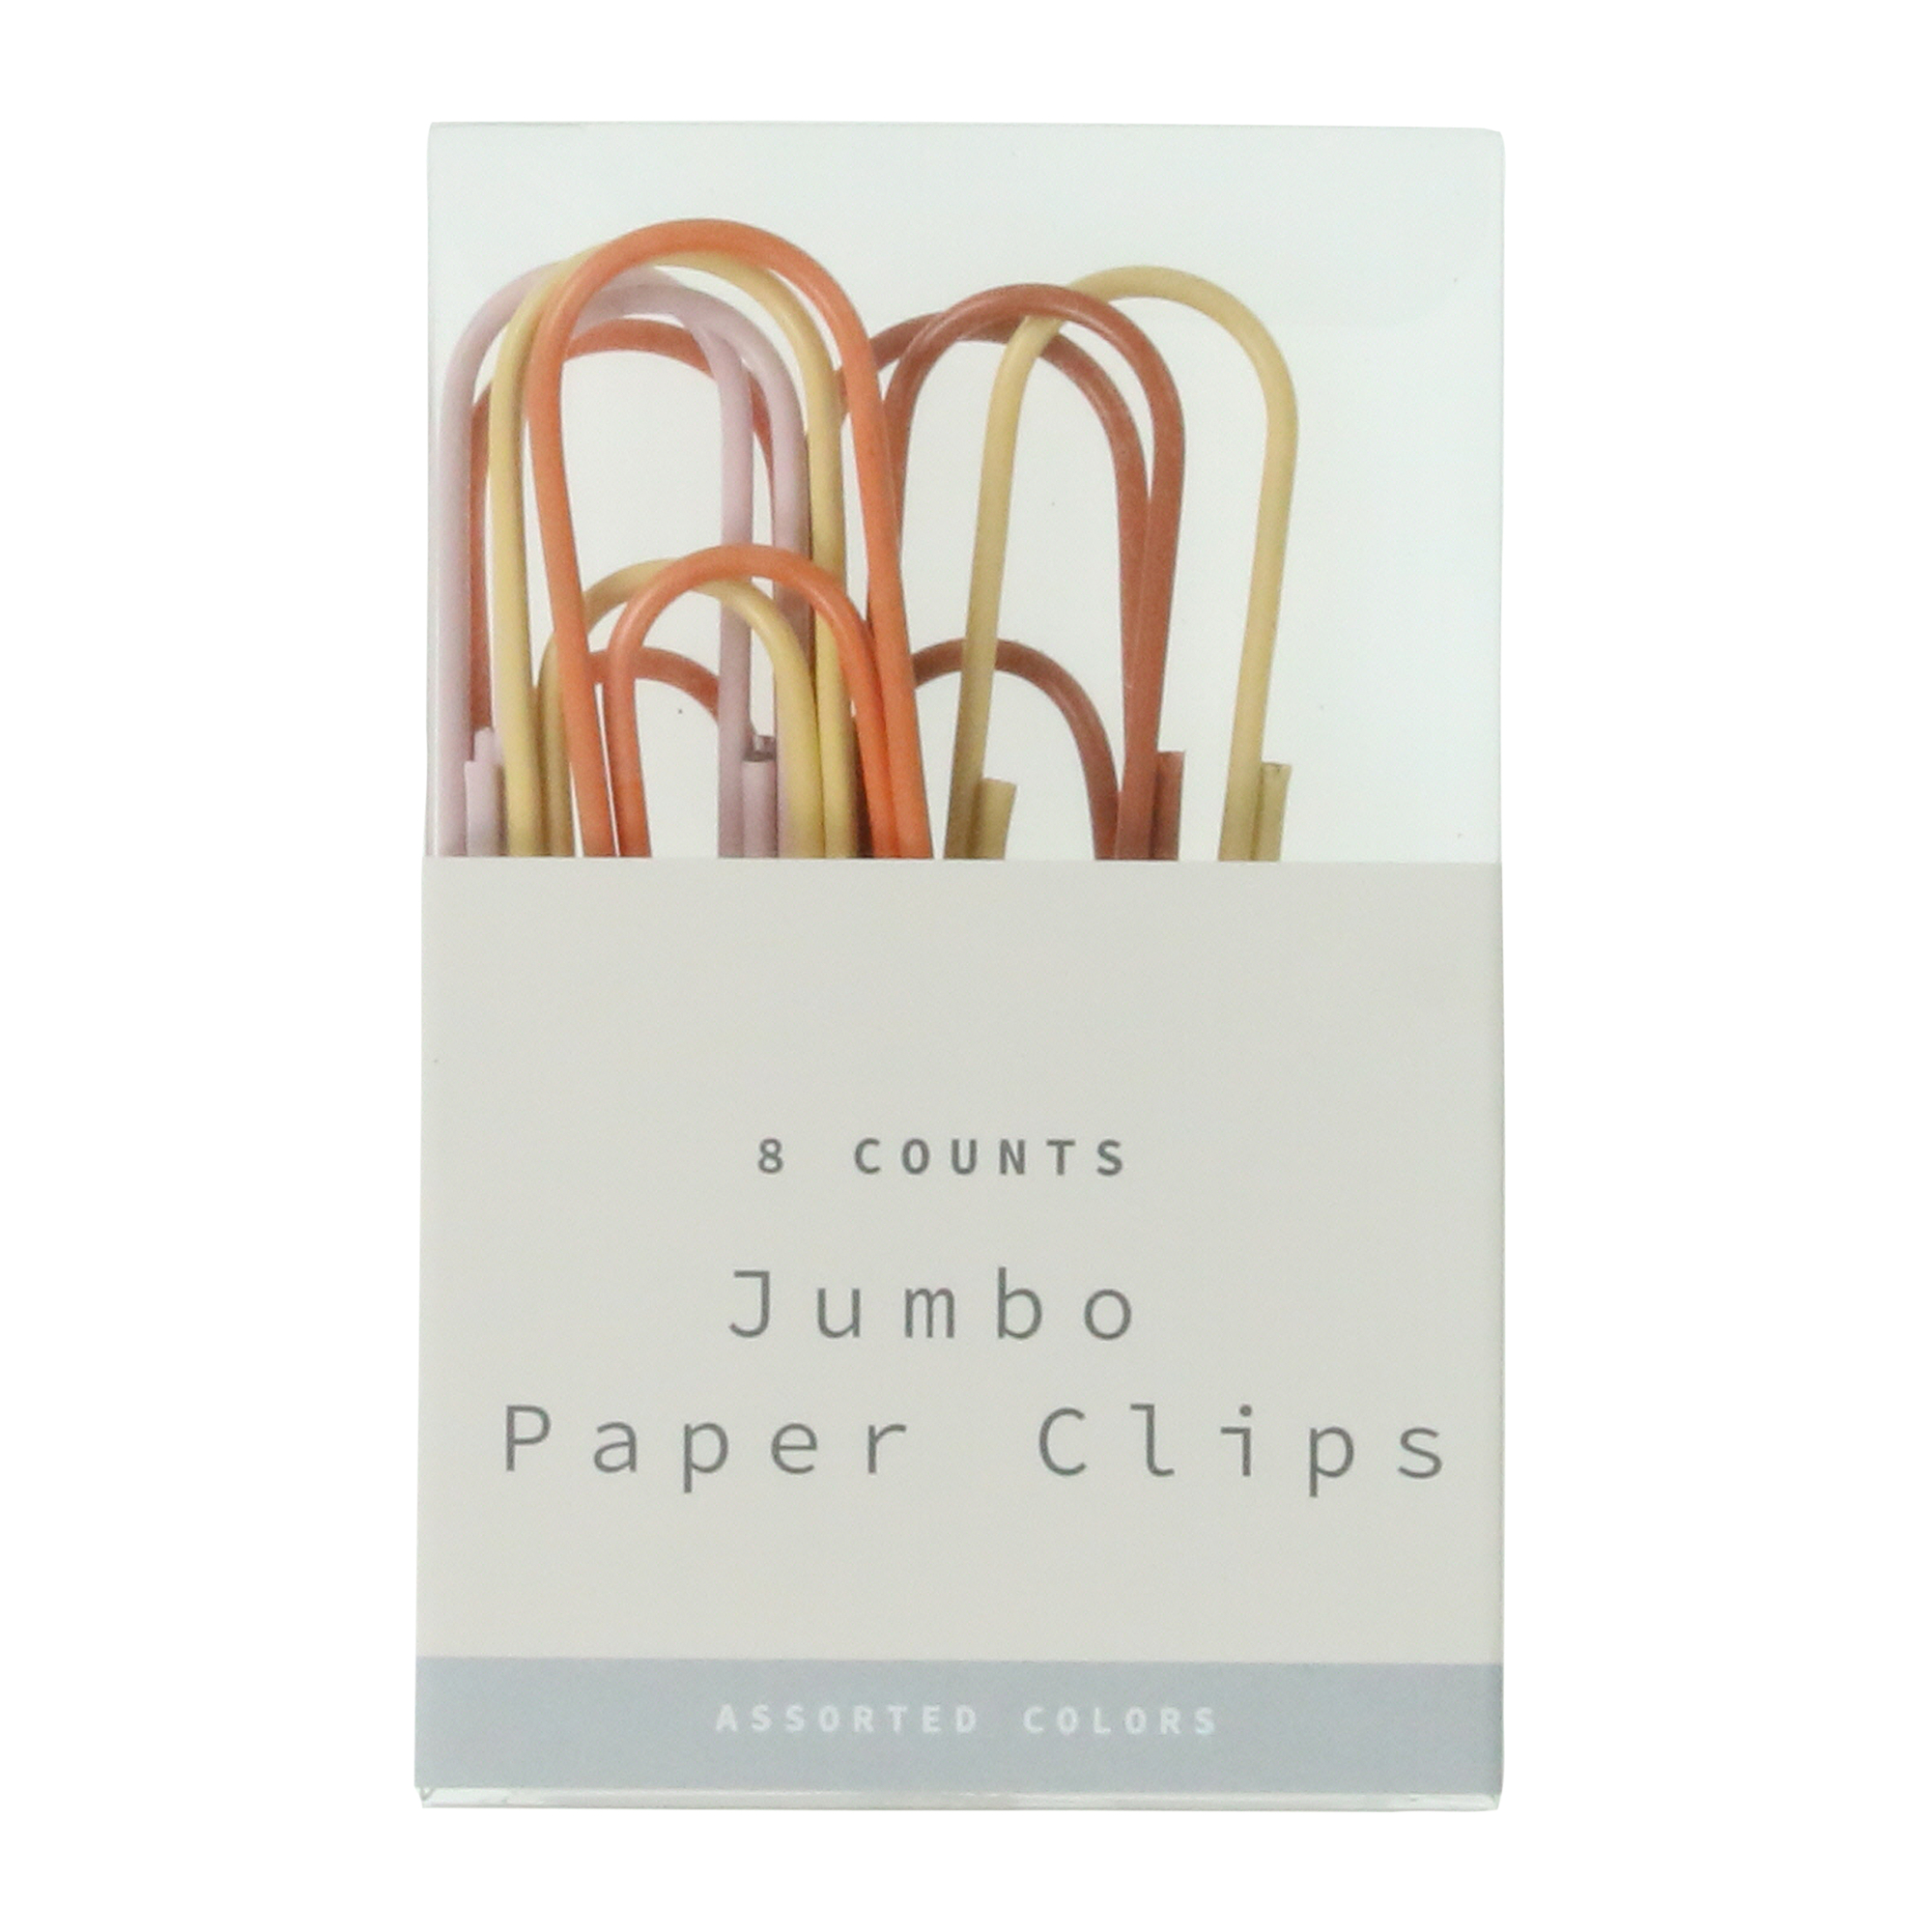 8-count jumbo paper clips, assorted colors